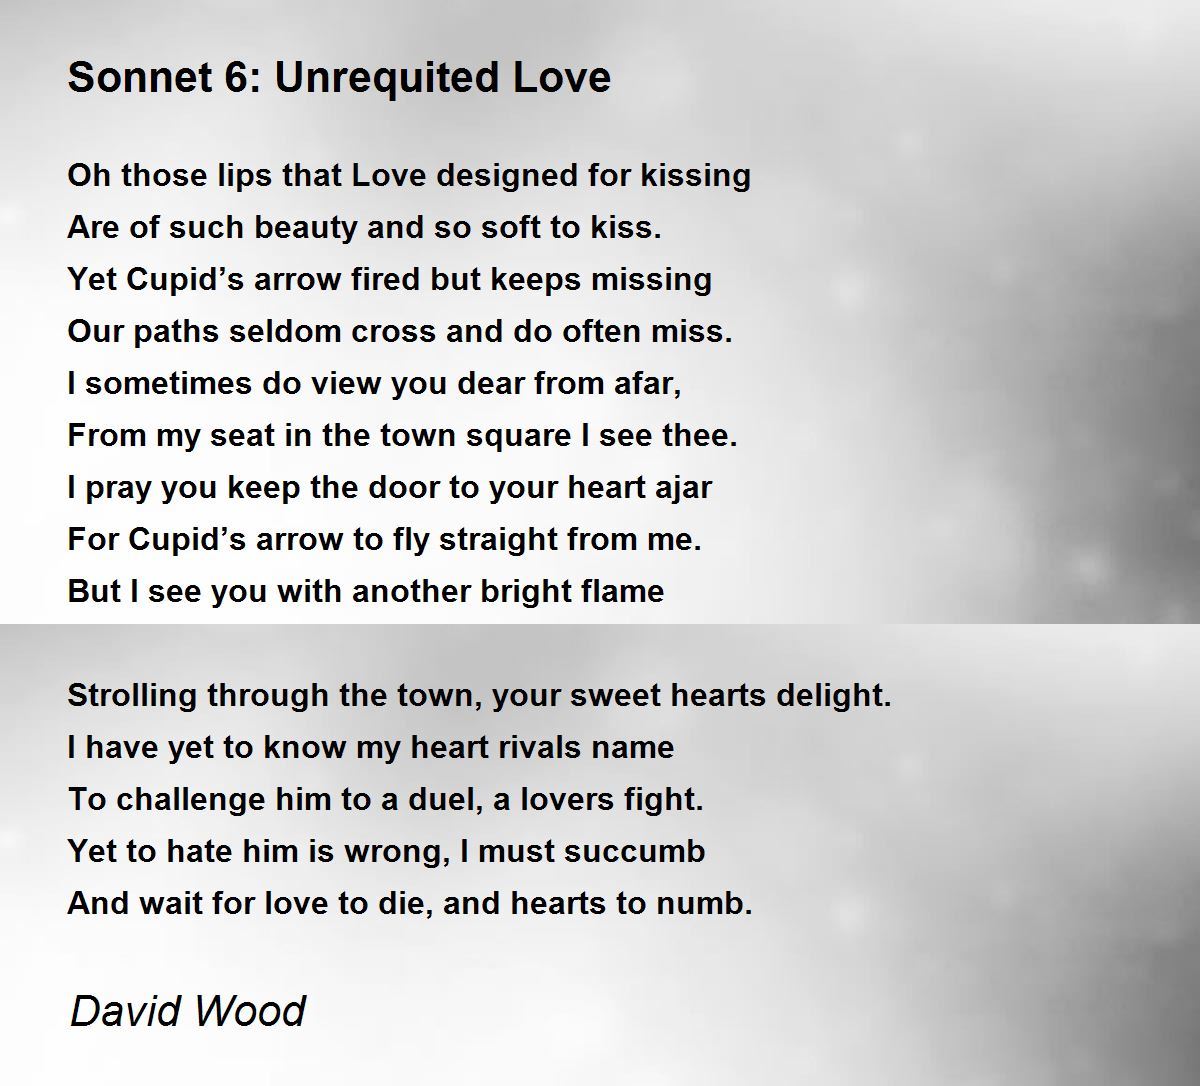 unrequited love shakespeare sonnet